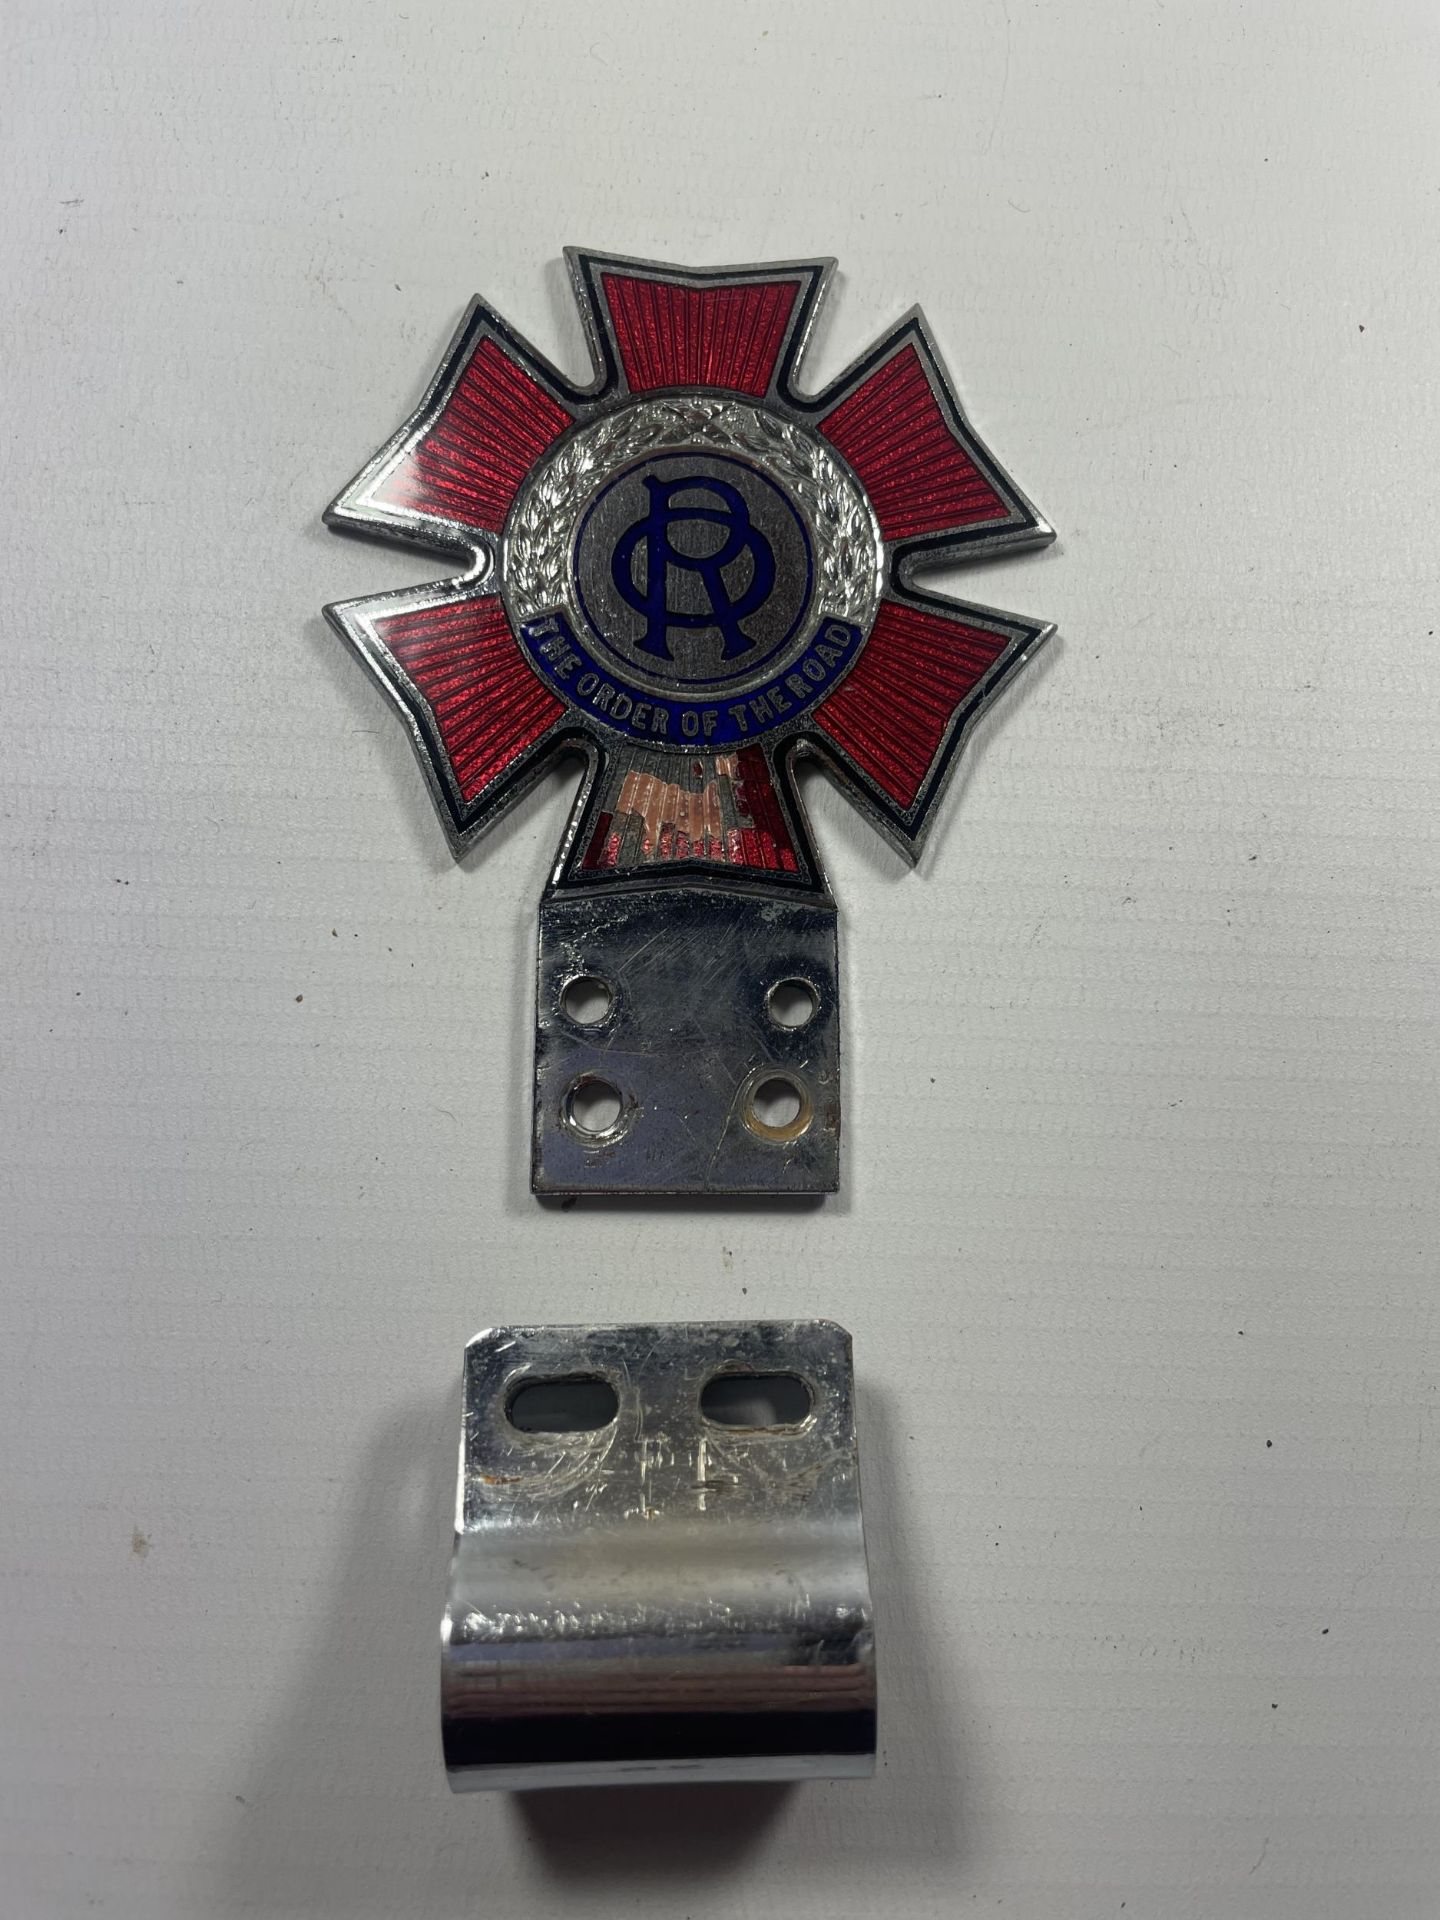 A VINTAGE ENAMEL ORDER OF THE ROAD BUMPER BADGE WITH CLIP